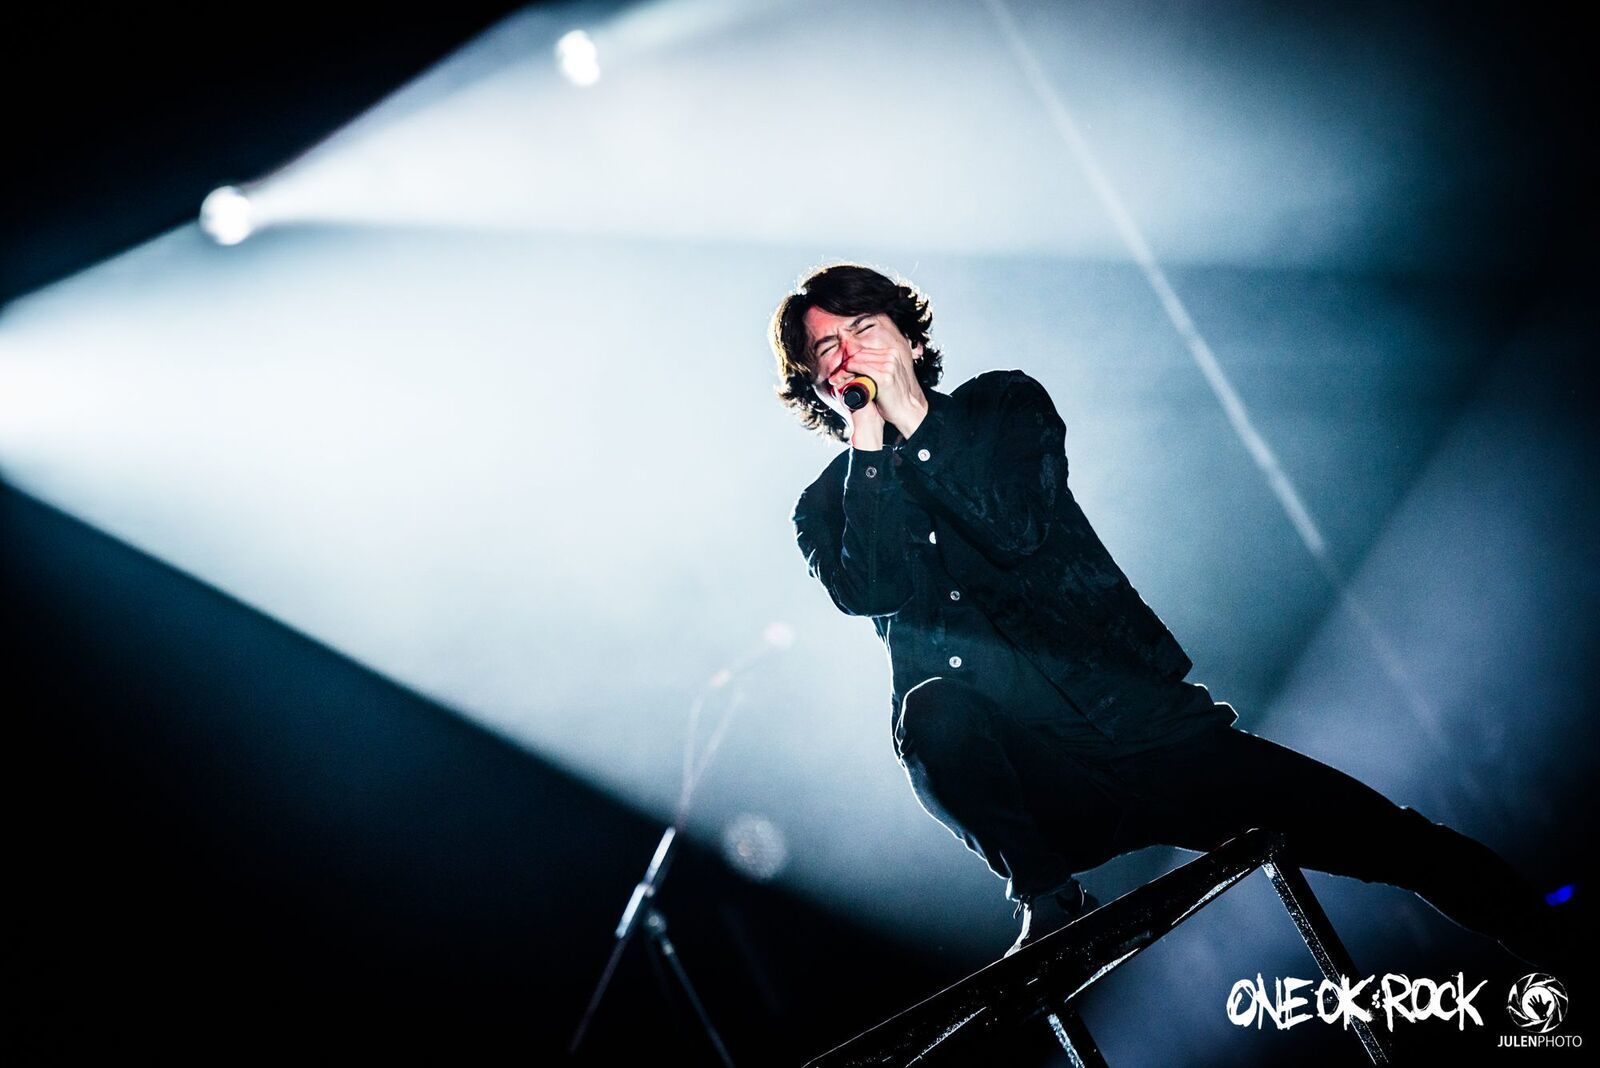 The Cheers Turned To Roars As The Lights Dimmed And One Ok Rock Live 18 Hd Wallpaper Backgrounds Download